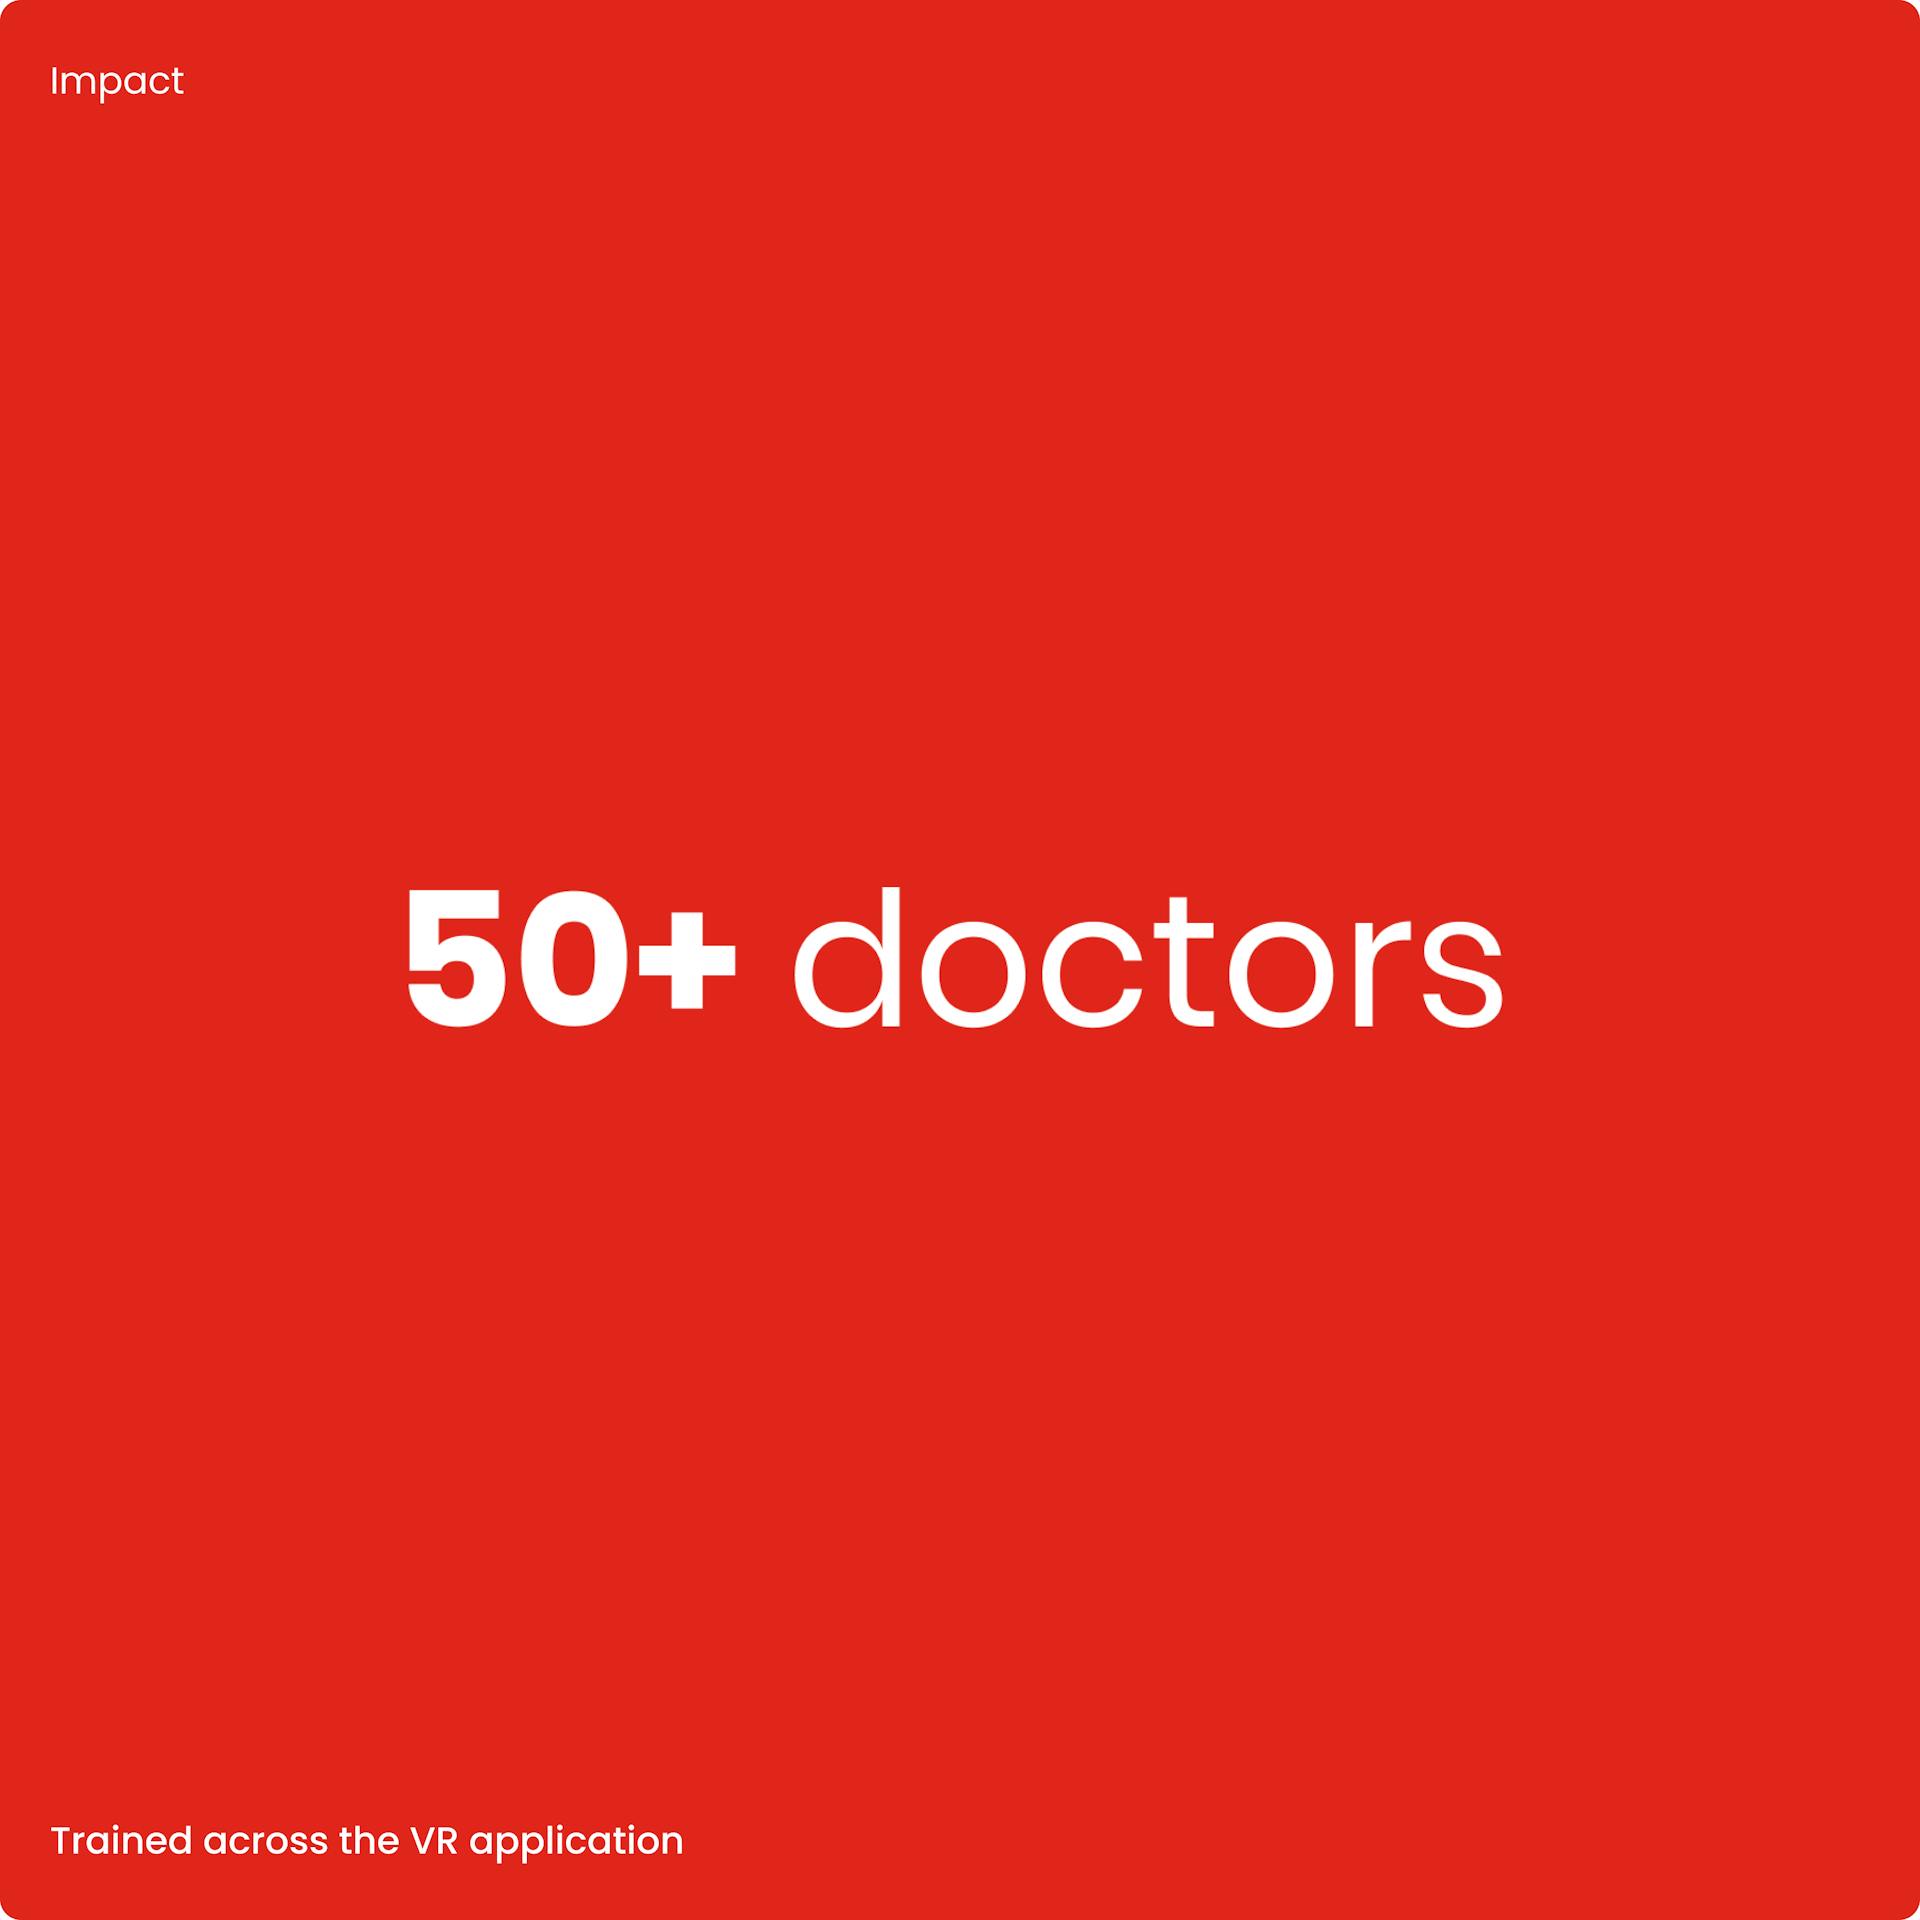 The text "50+ doctors" shown in white on a red background, with footnote text that reads "Trained across the VR application".